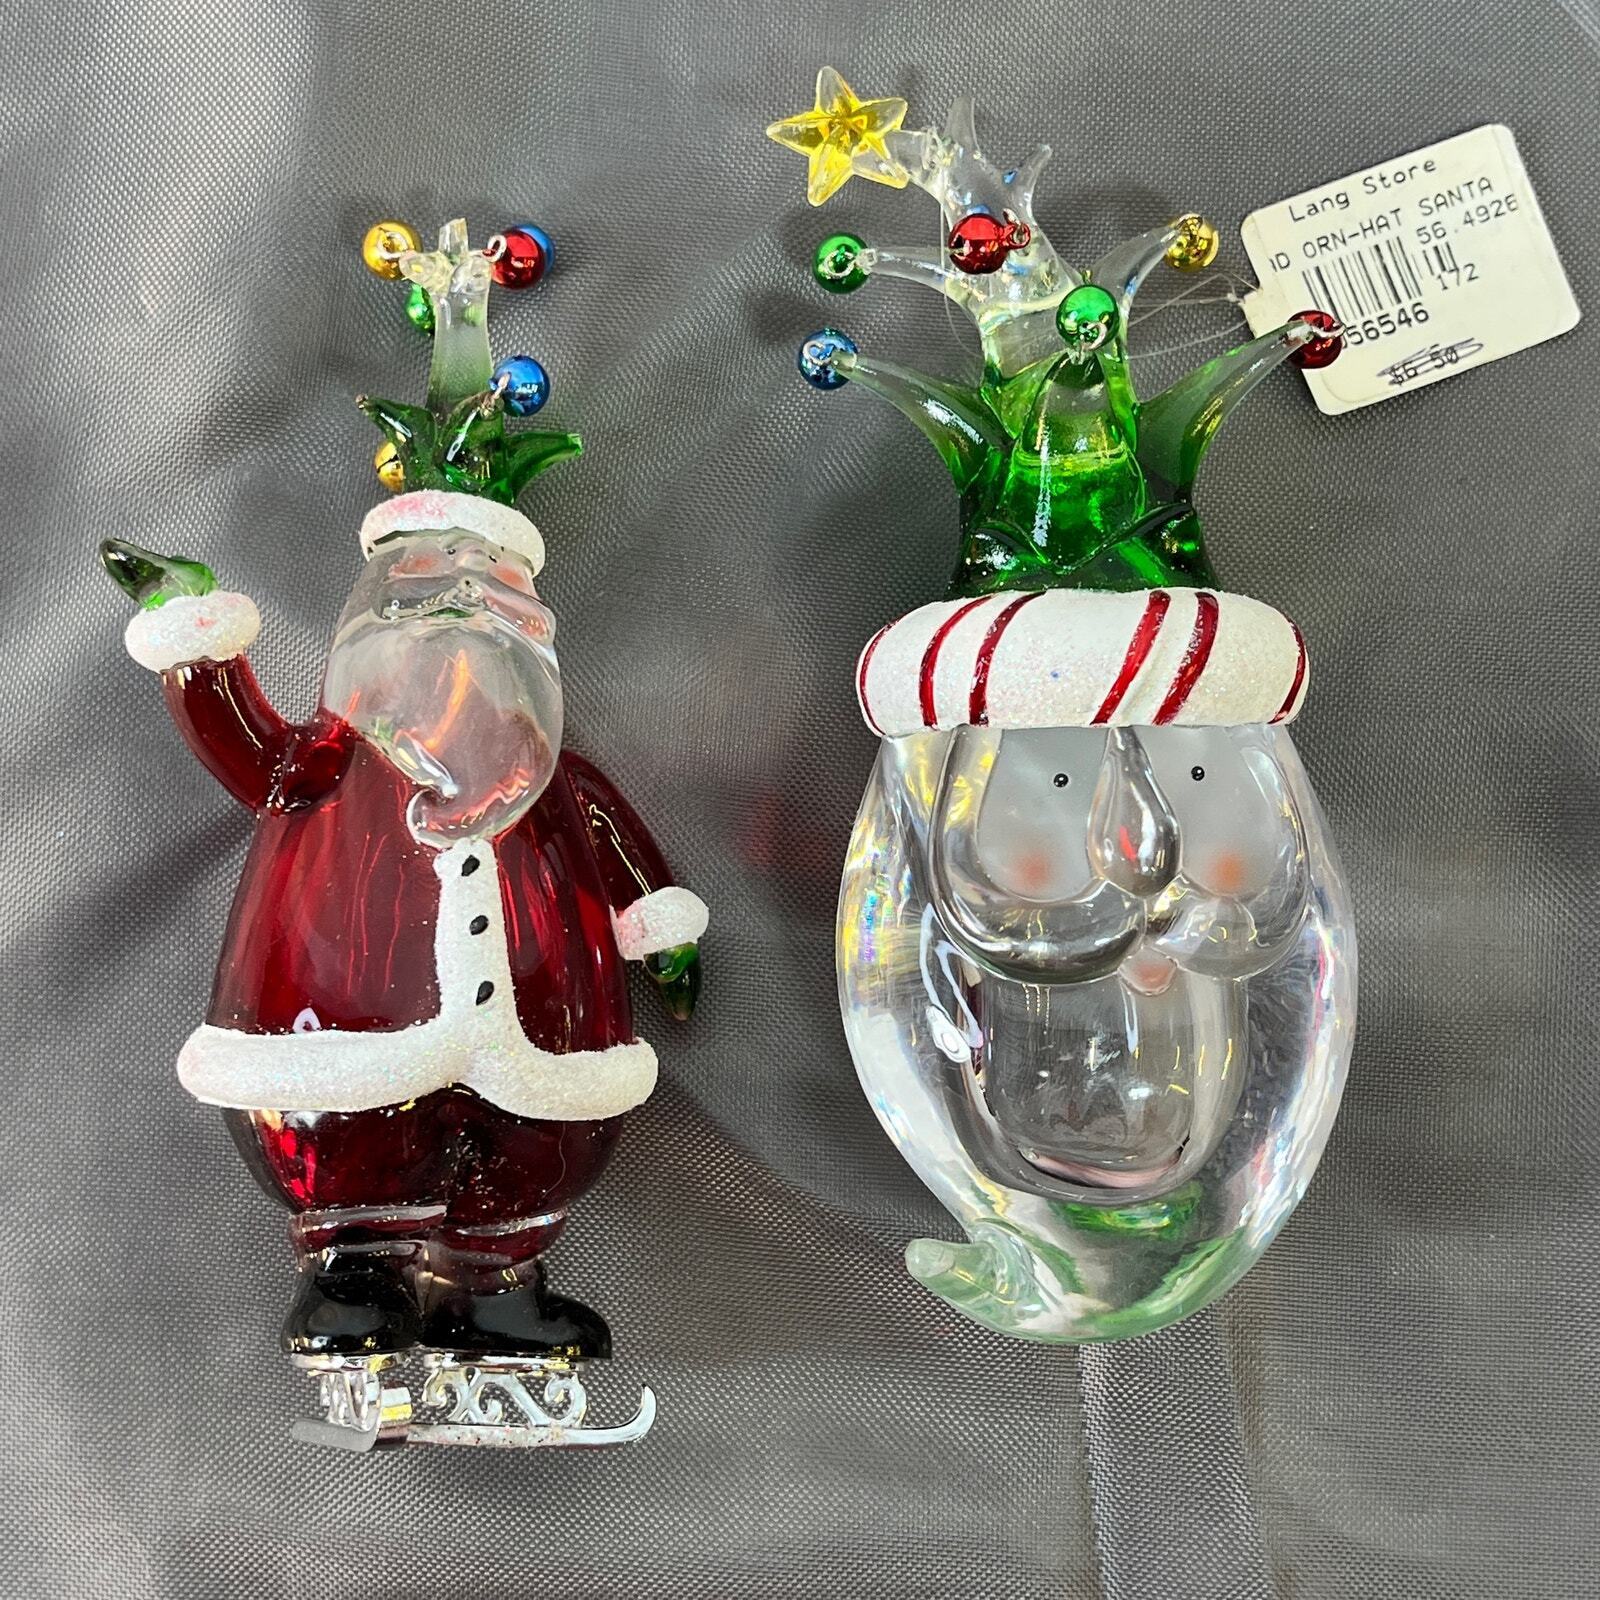 Acrylic Jester Hat Santa Claus Christmas Ornaments Dept 56 Lot of 2